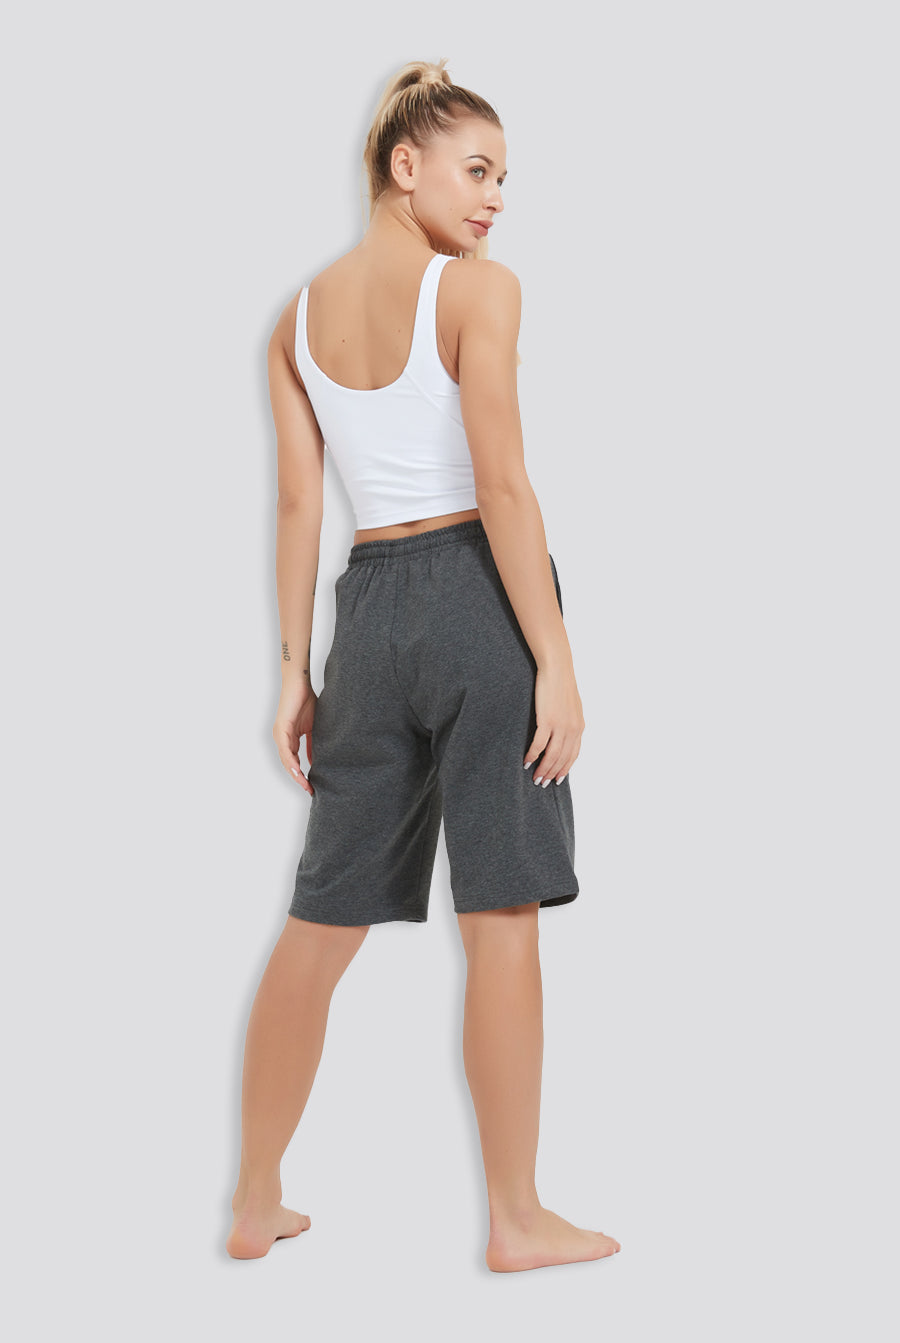 womens cotton shorts with pockets Charcoal back view